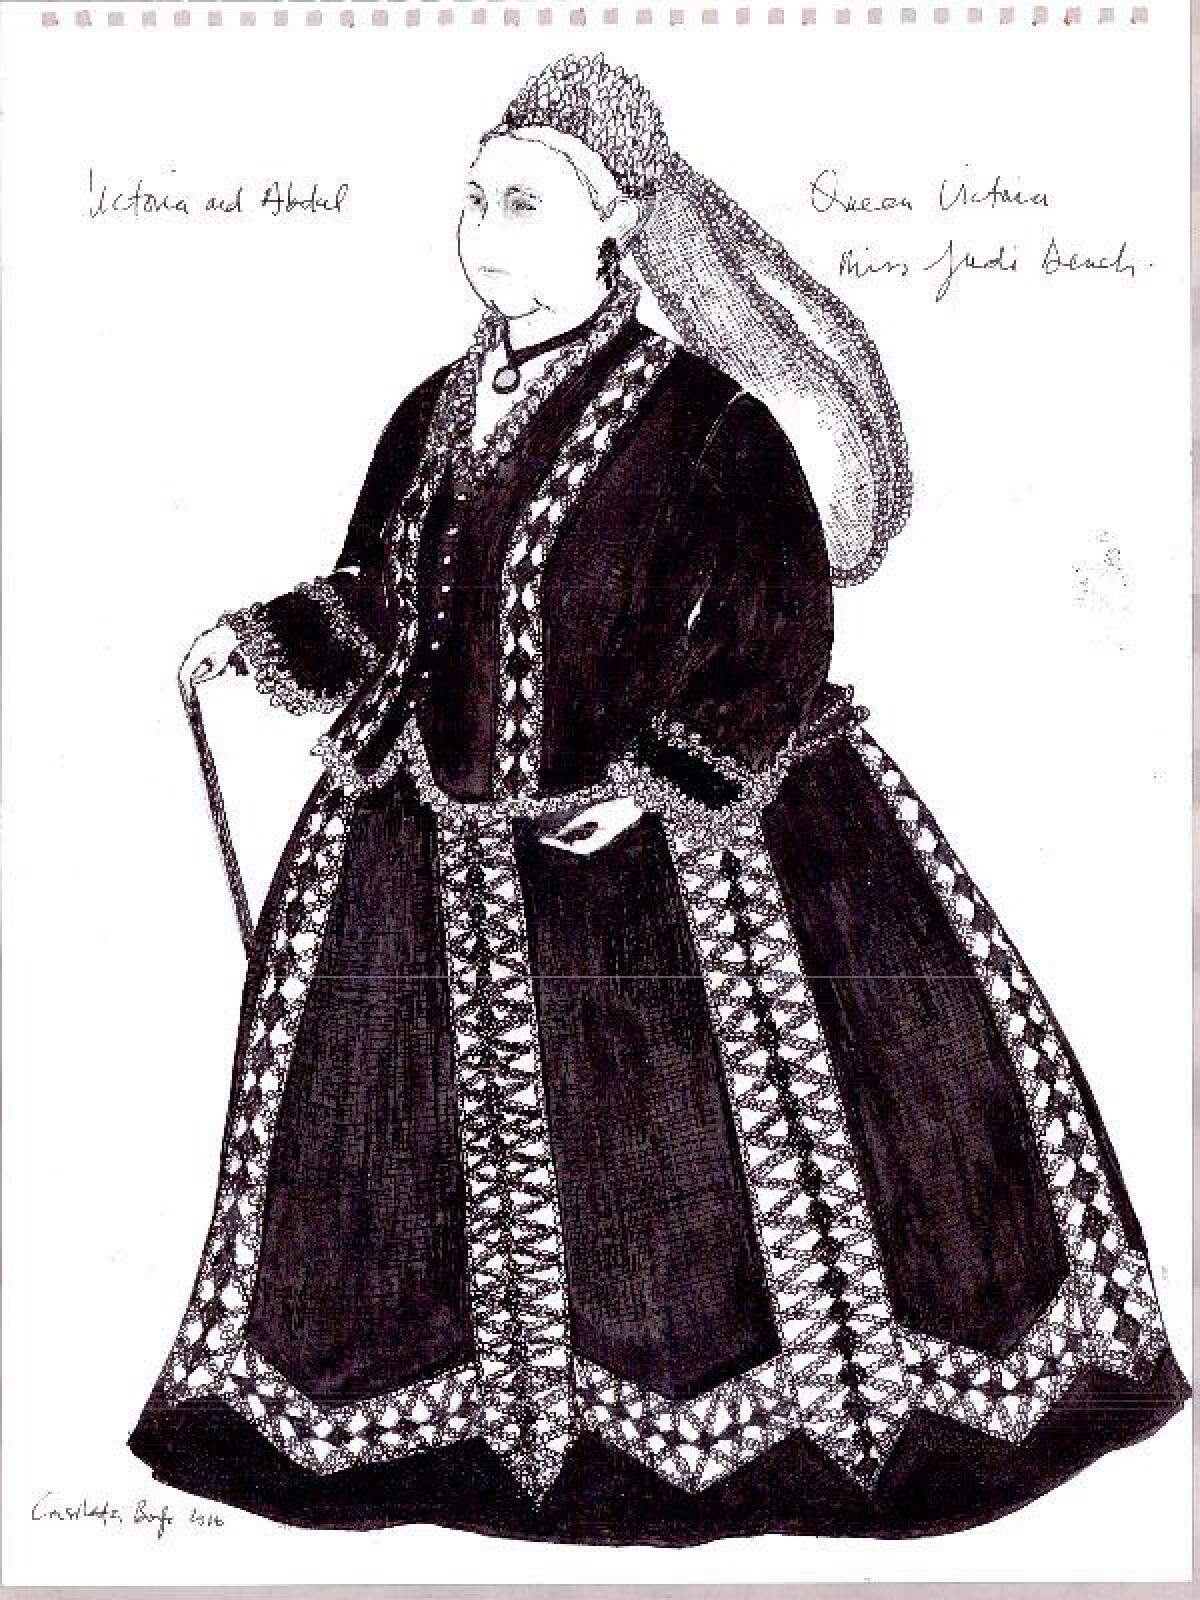 Sketches of costumes from "Victoria and Abdul."